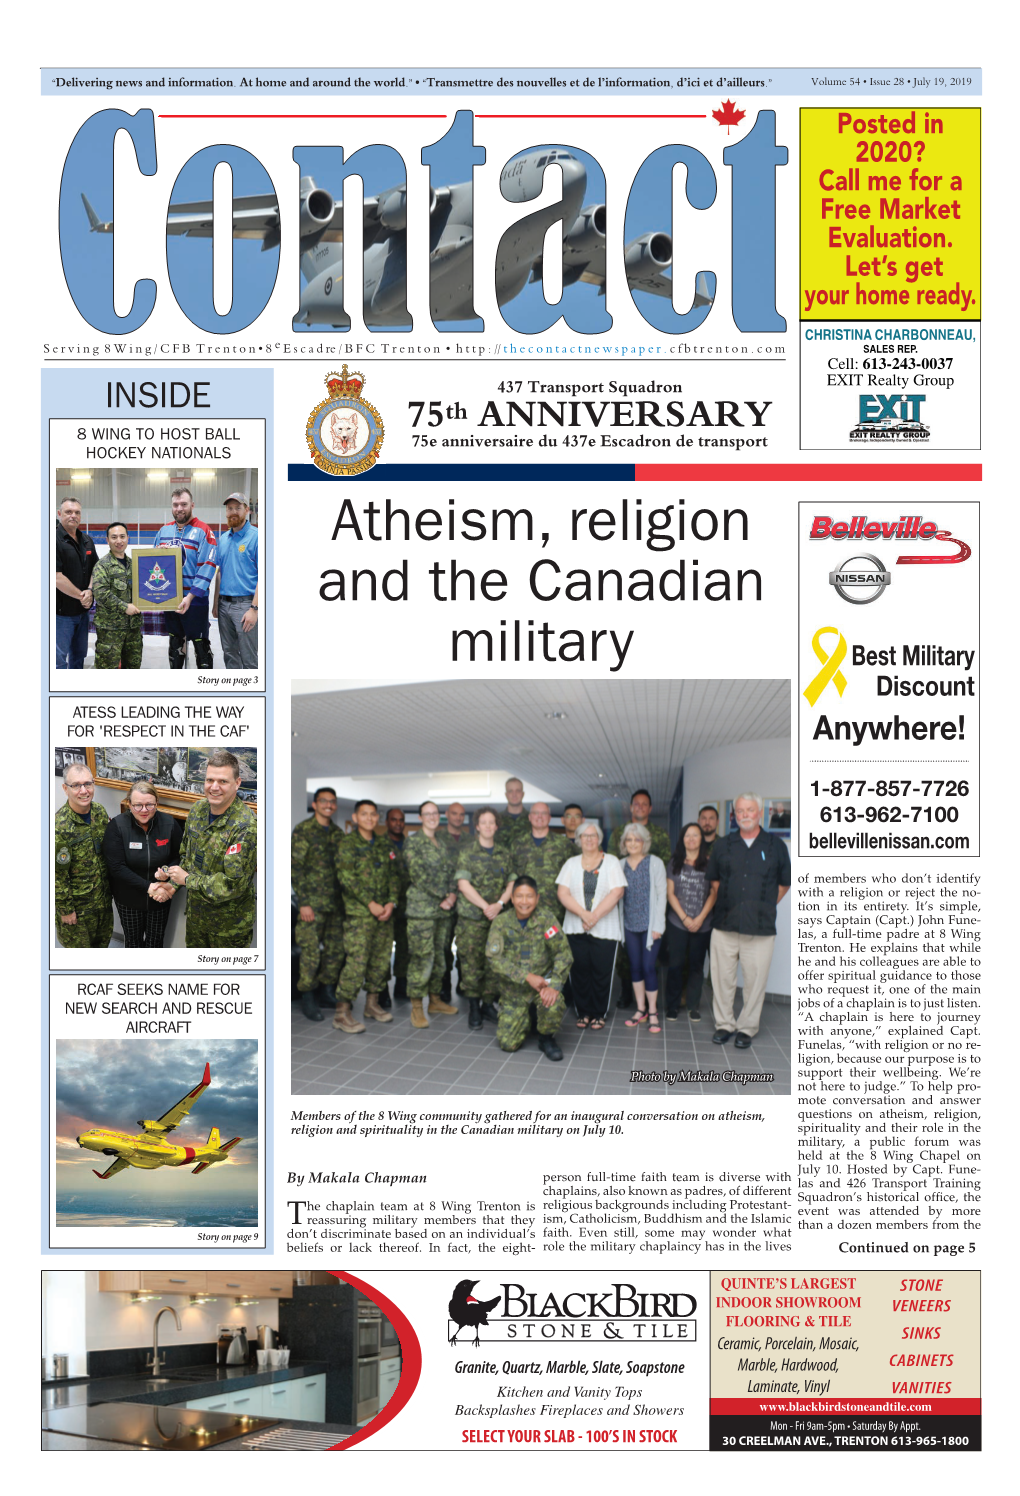 Atheism, Religion and the Canadian Military Best Military Story on Page 3 Discount ATESS LEADING the WAY for 'RESPECT in the CAF' Anywhere!